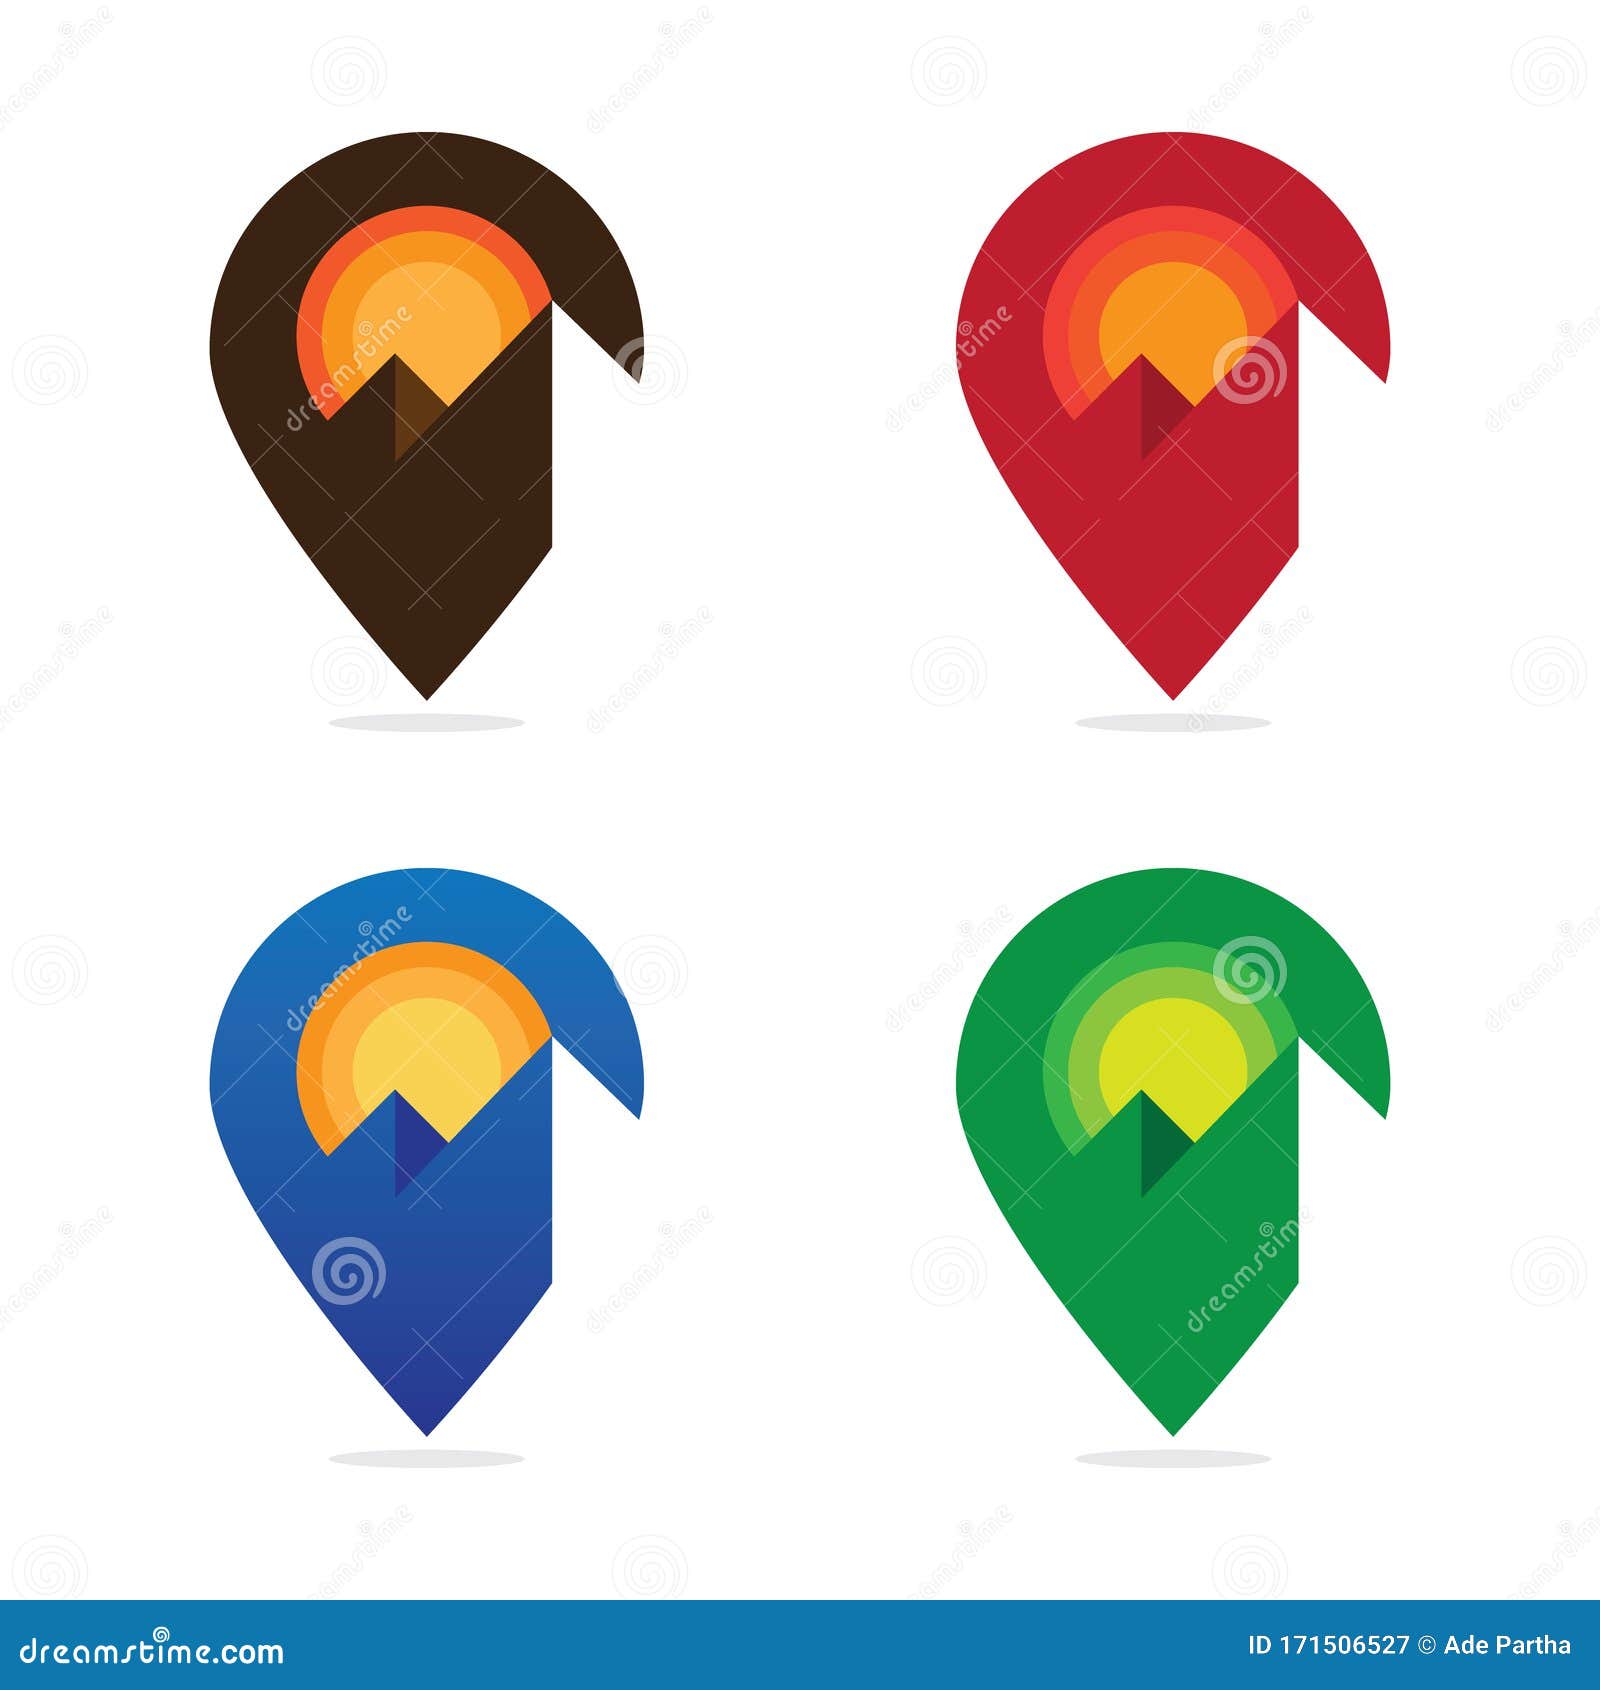 colorful set of adventure maps icon